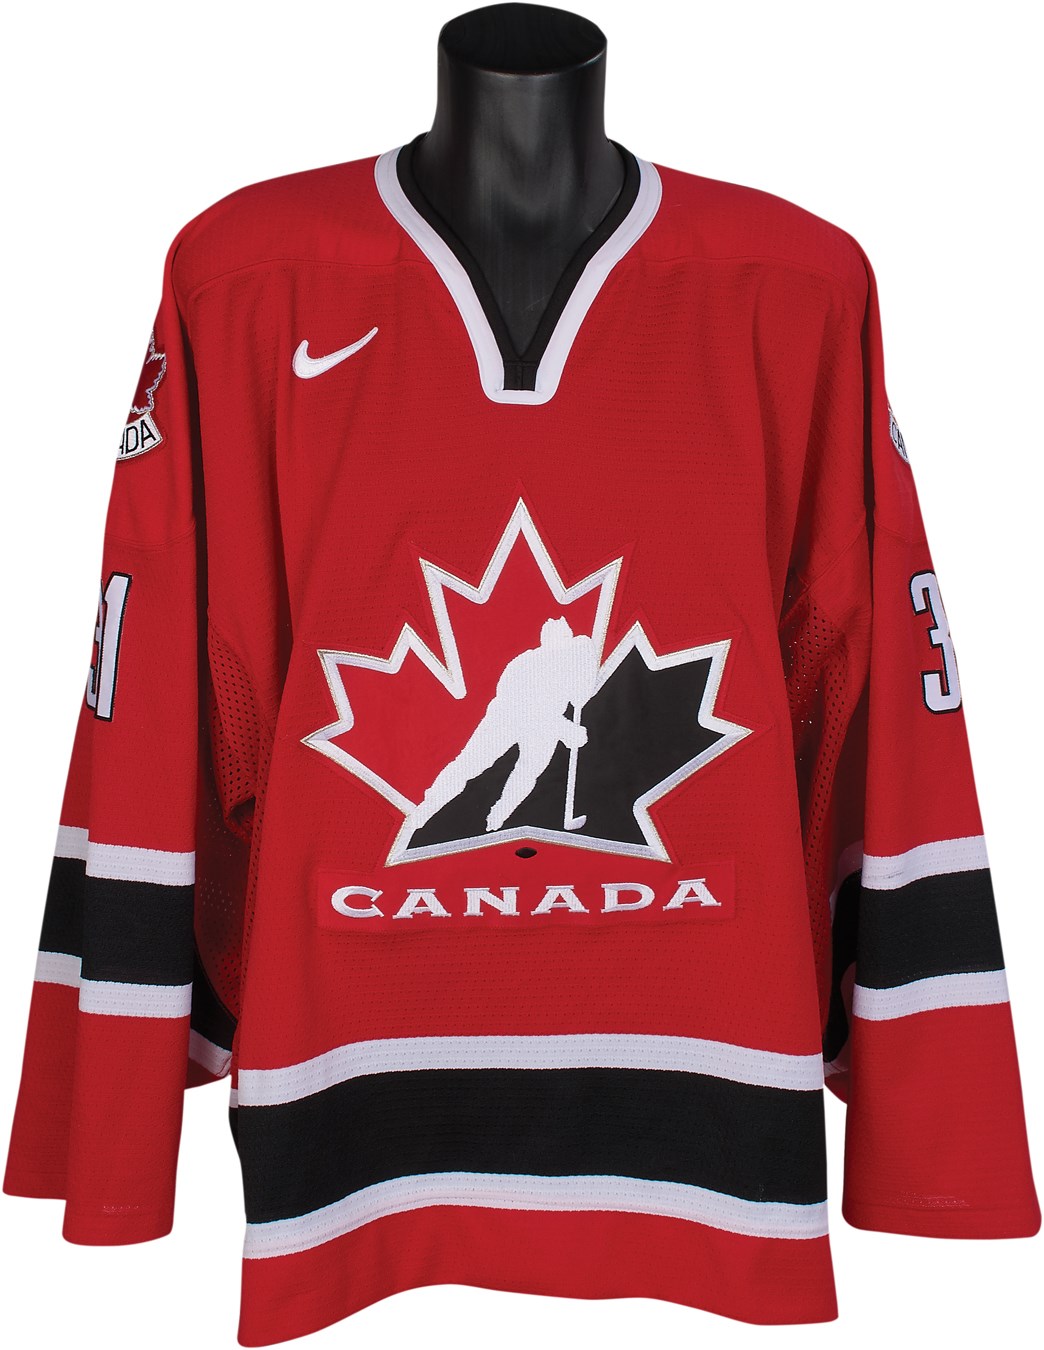 Hockey - 2002 Pascal Leclaire Team Canada World Junior Game Worn Jersey